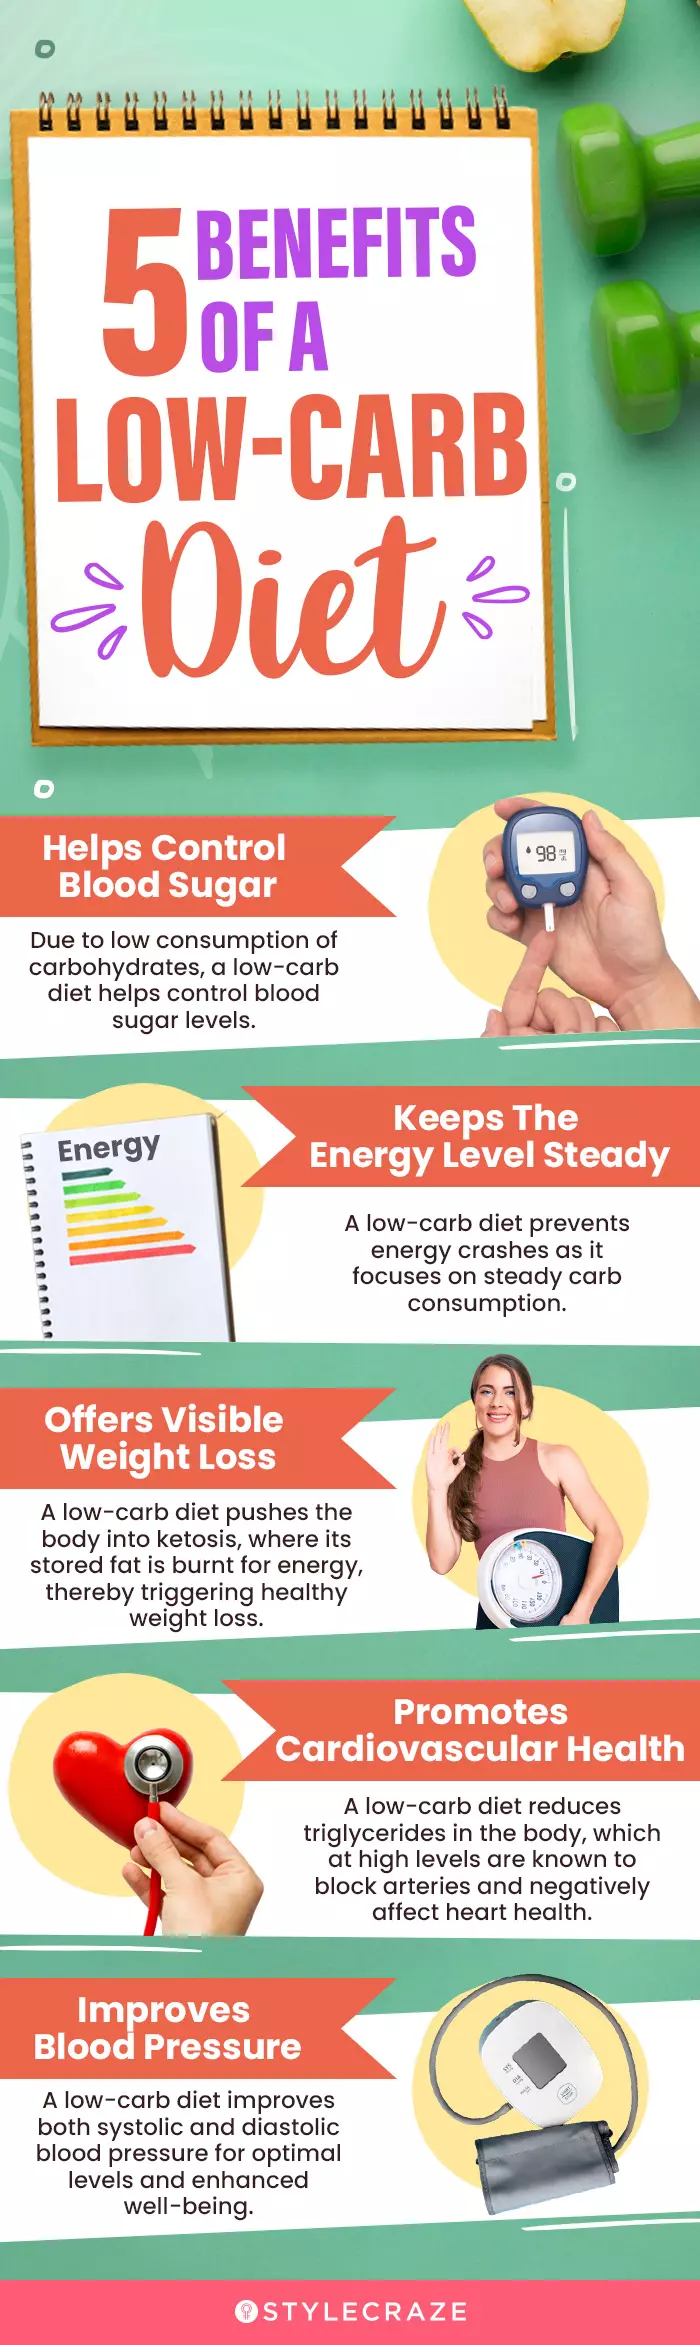 5 benefits of a low carb diet(infographic)